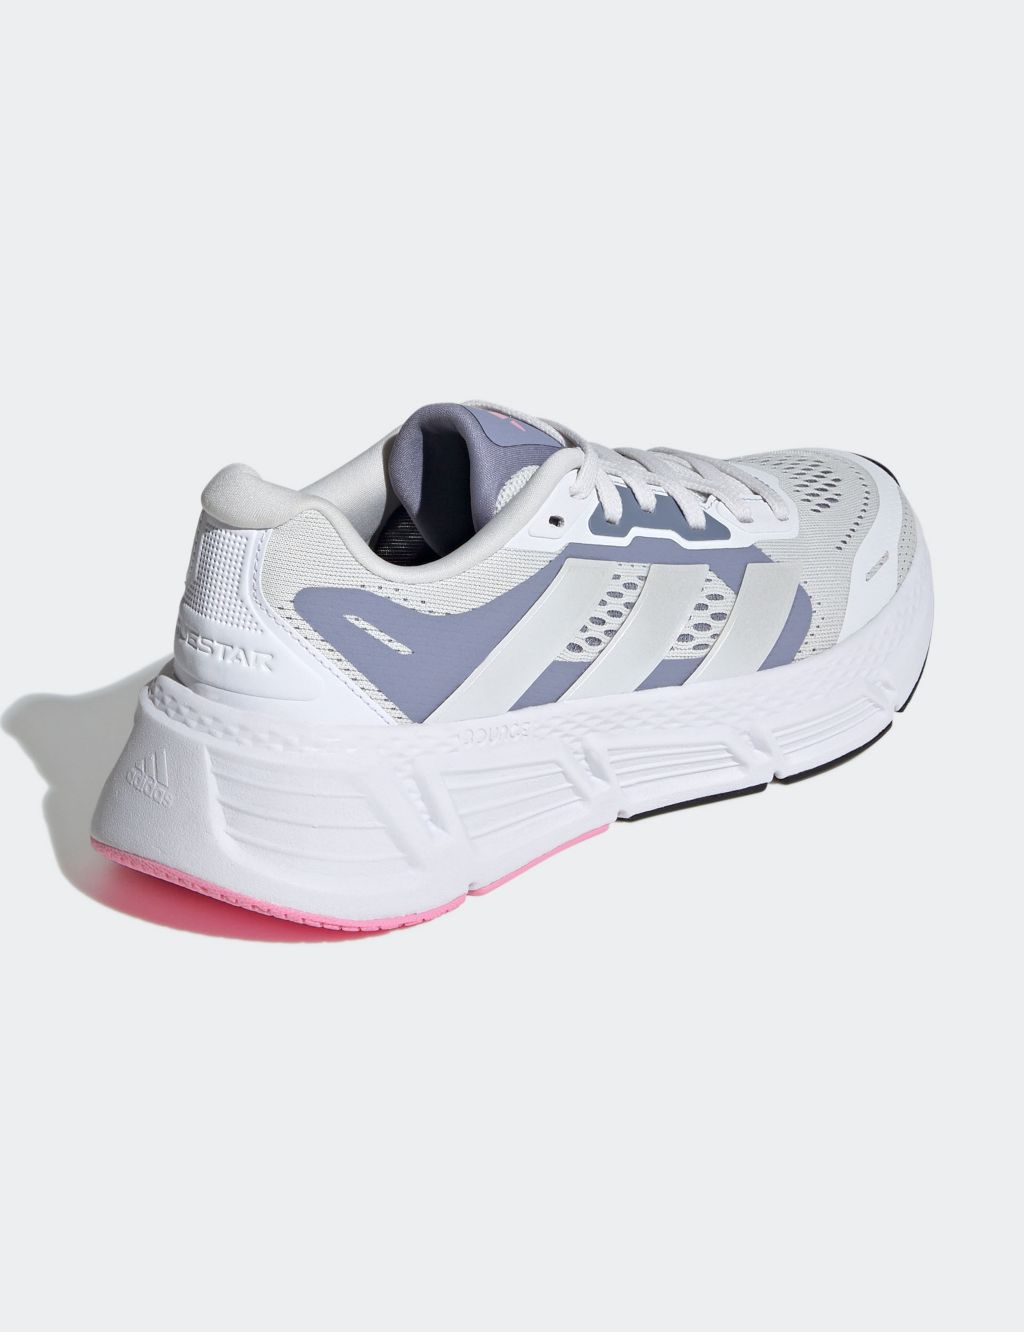 Questar 2 Bounce Running Trainers image 6